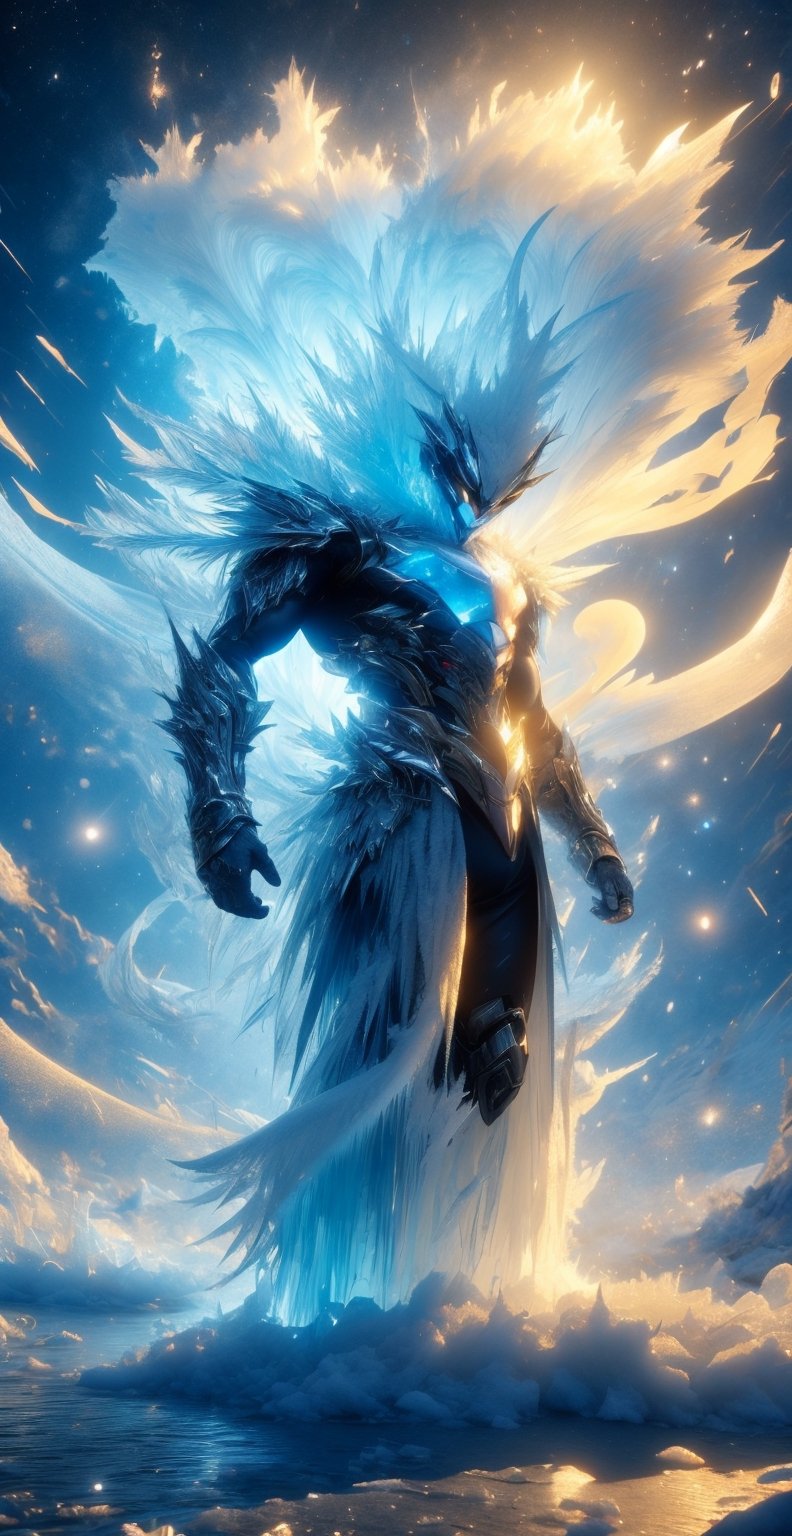 Ice theme, 1man, solo, very muscular body, blue starry eyes, long spiky hair, white hair, angry, powerful appearance, magical surrealism, thick double layer armored blue metal golden robe, warframe, astral chain, ice_wings, standing on icy lake, Gorgeous, ethereal aura, ray tracing, sidelighting, detailed face, bright skin, dreamlike atmosphere, starry nebula background, Sharp glossy focus, equirectangular 360, Highres 8k, extreme detailed, aesthetic, masterpiece, best quality, rich texture, kinetic move effect, colorful,Movie Still,r1ge,IceElementCh,ice_sculpture,ic34rmor,DonMGl4c14l,DonMSn0wM4g1c